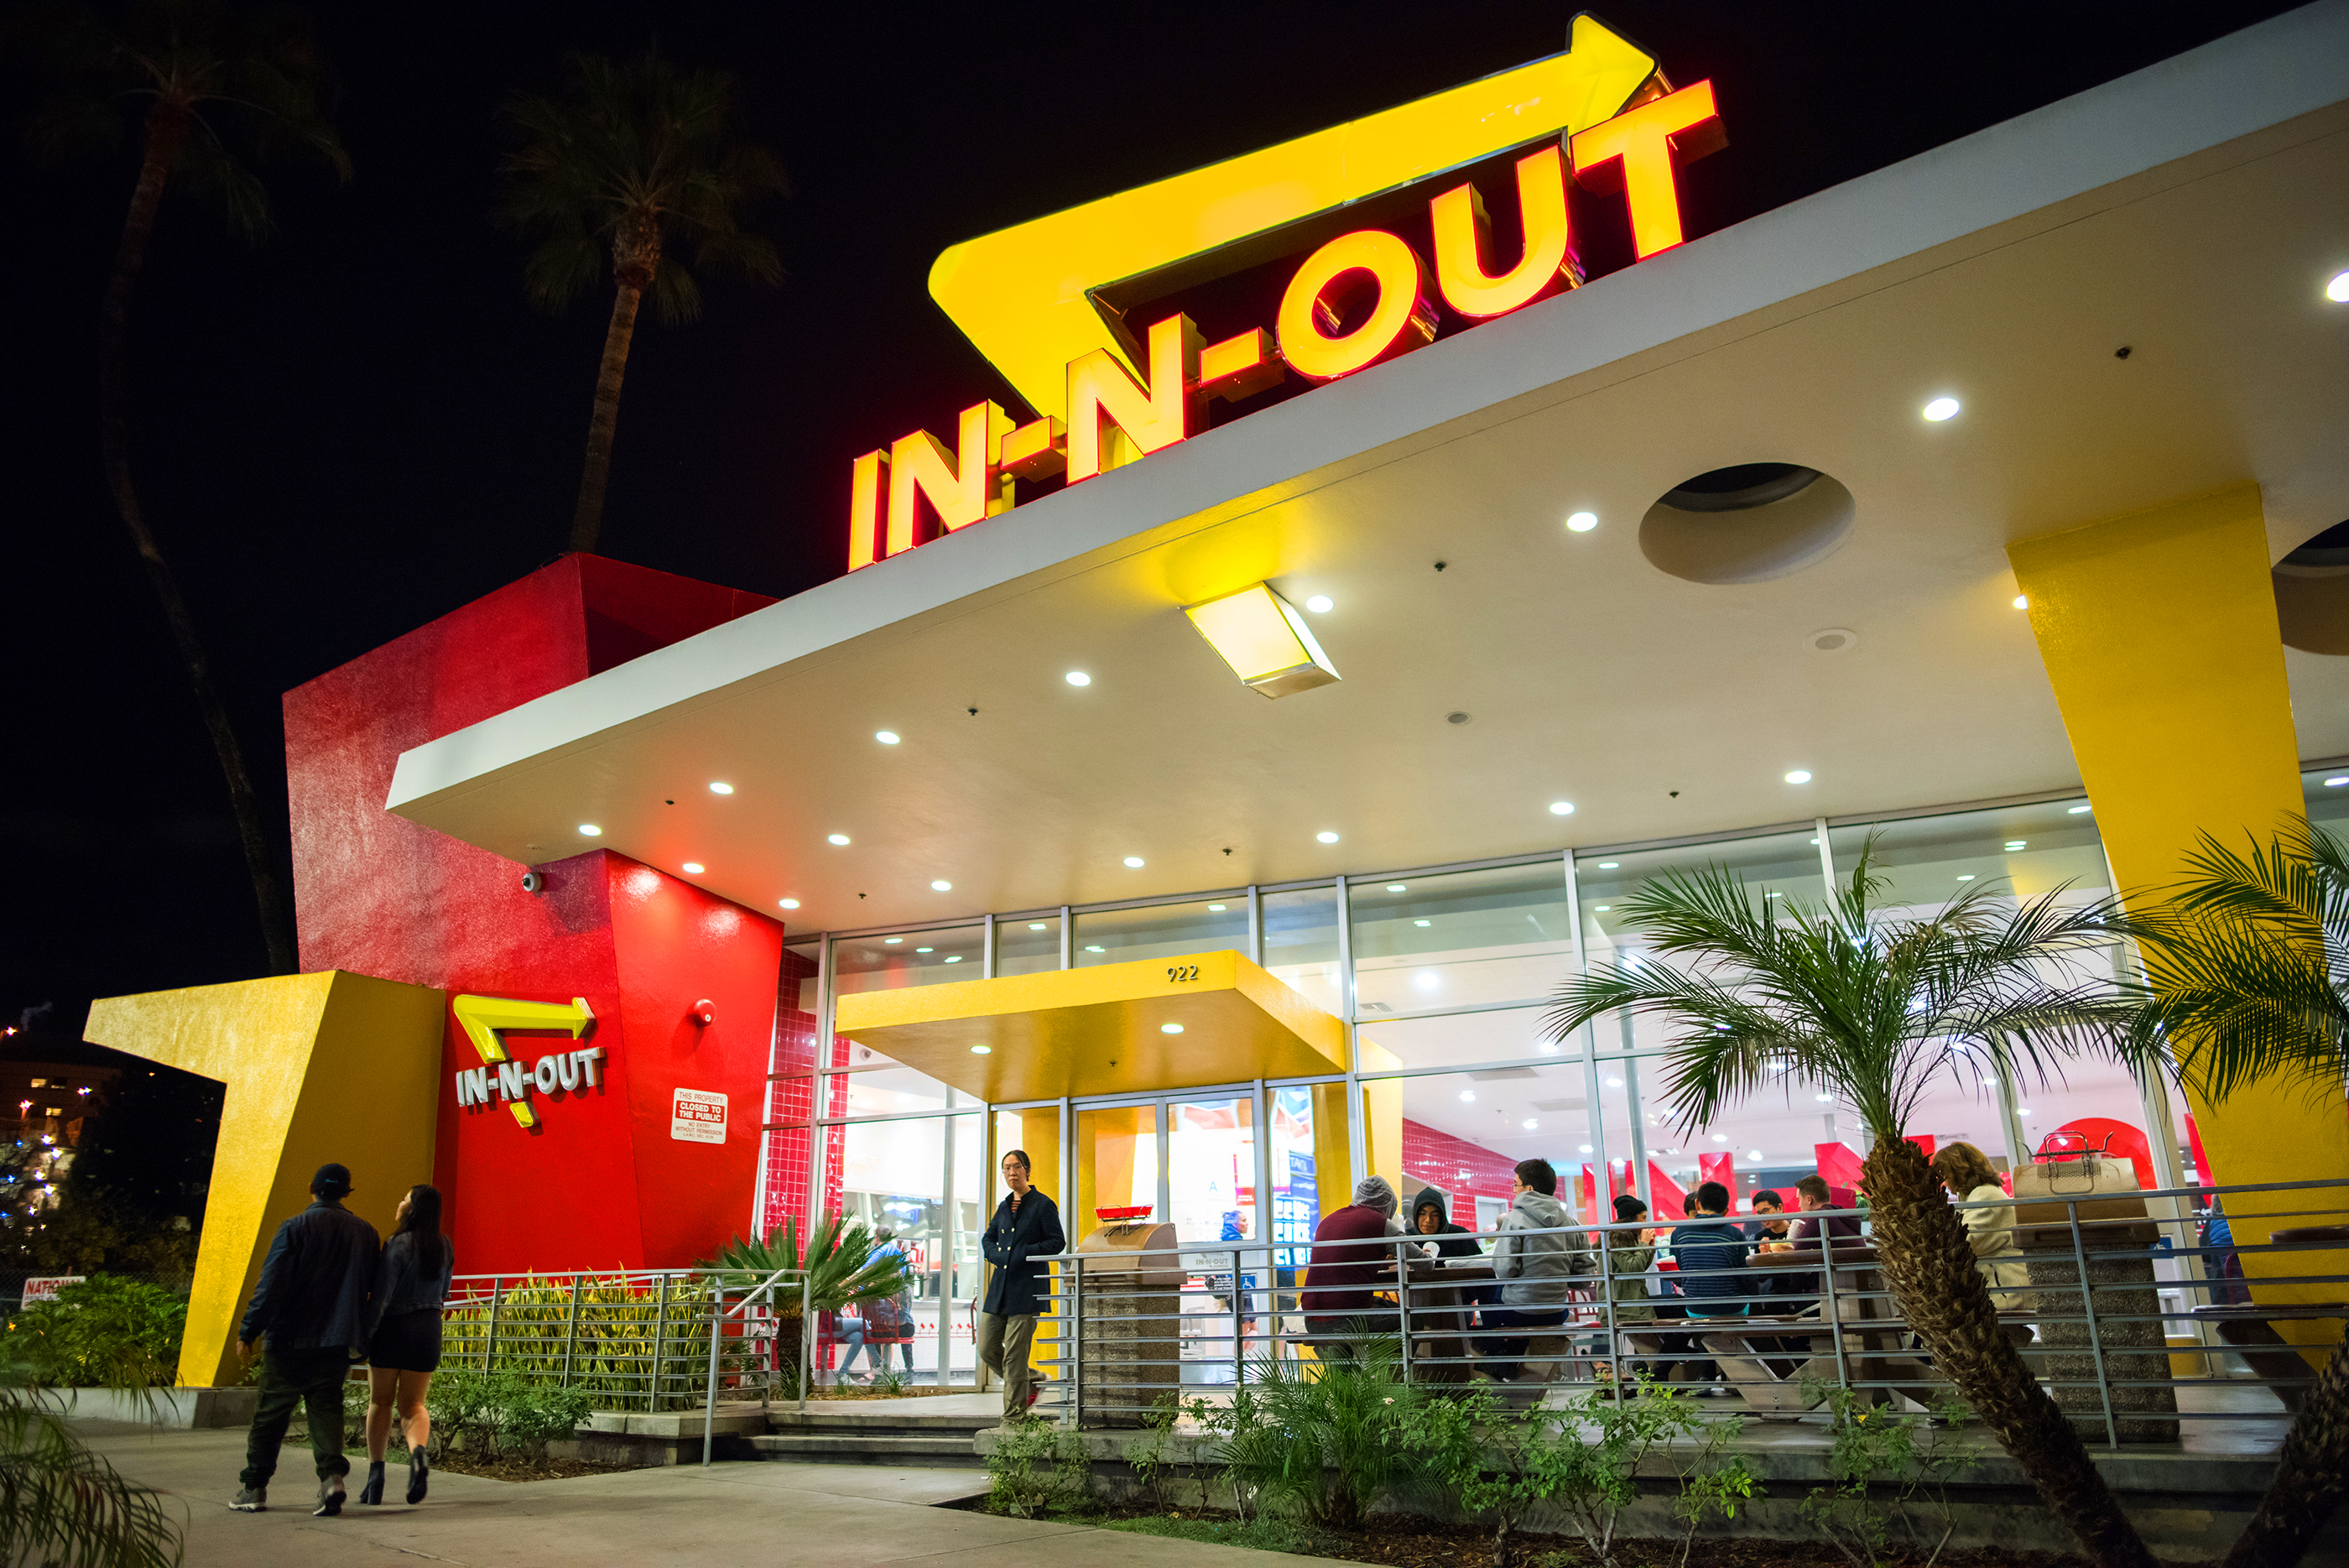 Los Angeles, CA: January 13, 2017: In-N-Out Burger fast food restaurant in Westwood, California. In-N-Out Burger is a private company with 313 locations. ; Shutterstock ID 560049205; Publication: Money; Job: 4/5/18 Fast Food; Client/Licensee: Sarina Finkelstein; Other: